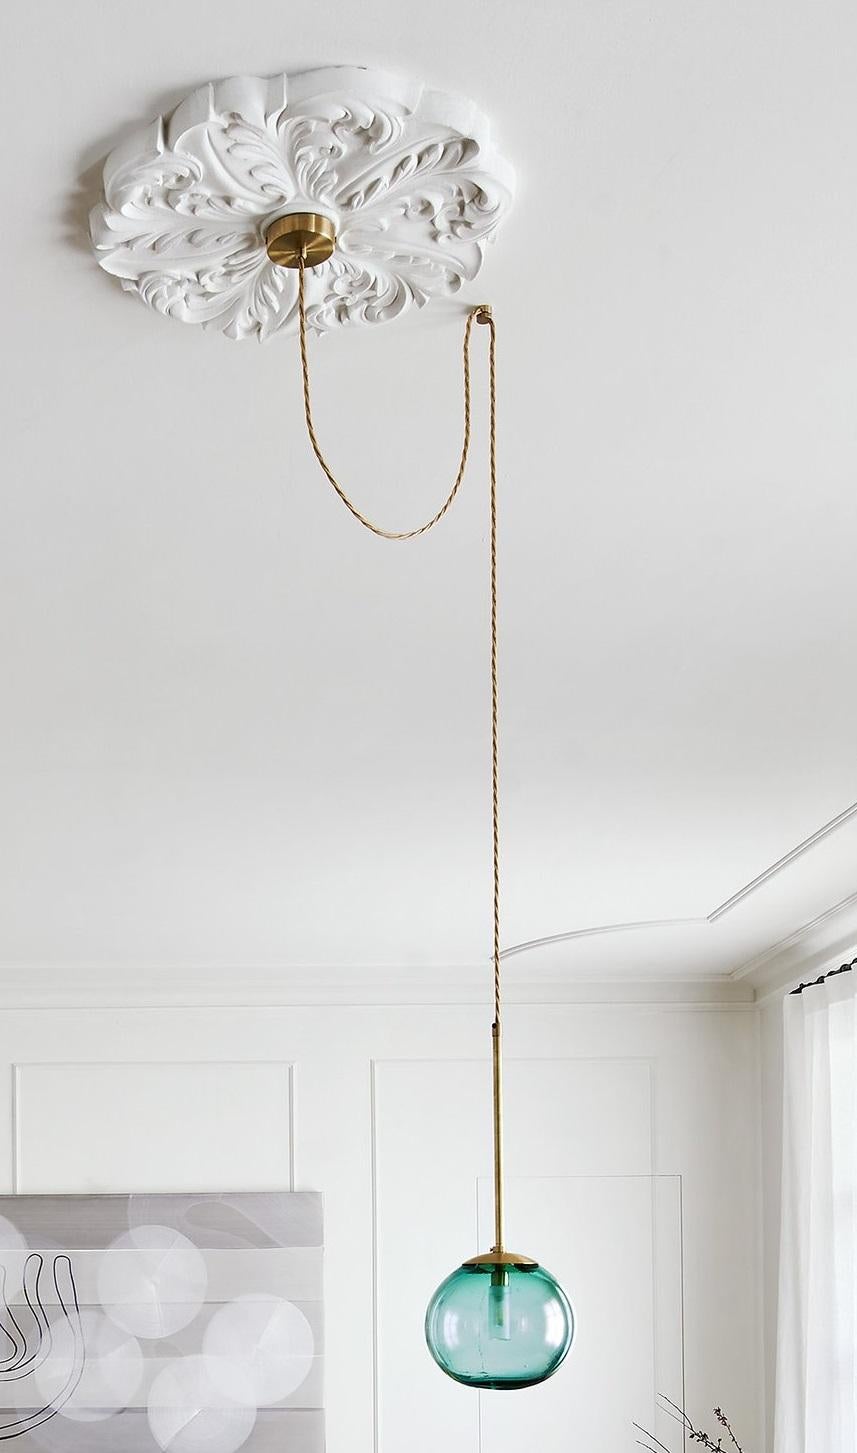 Pendant Ball Cable 20 by Contain
Dimensions: Ø 20 x H 100 cm (custom length).
Materials: Brass cable, 3D printed PLA structure and blown glass from local production.

Available in different finishes and dimensions. Please contact us. 

All our